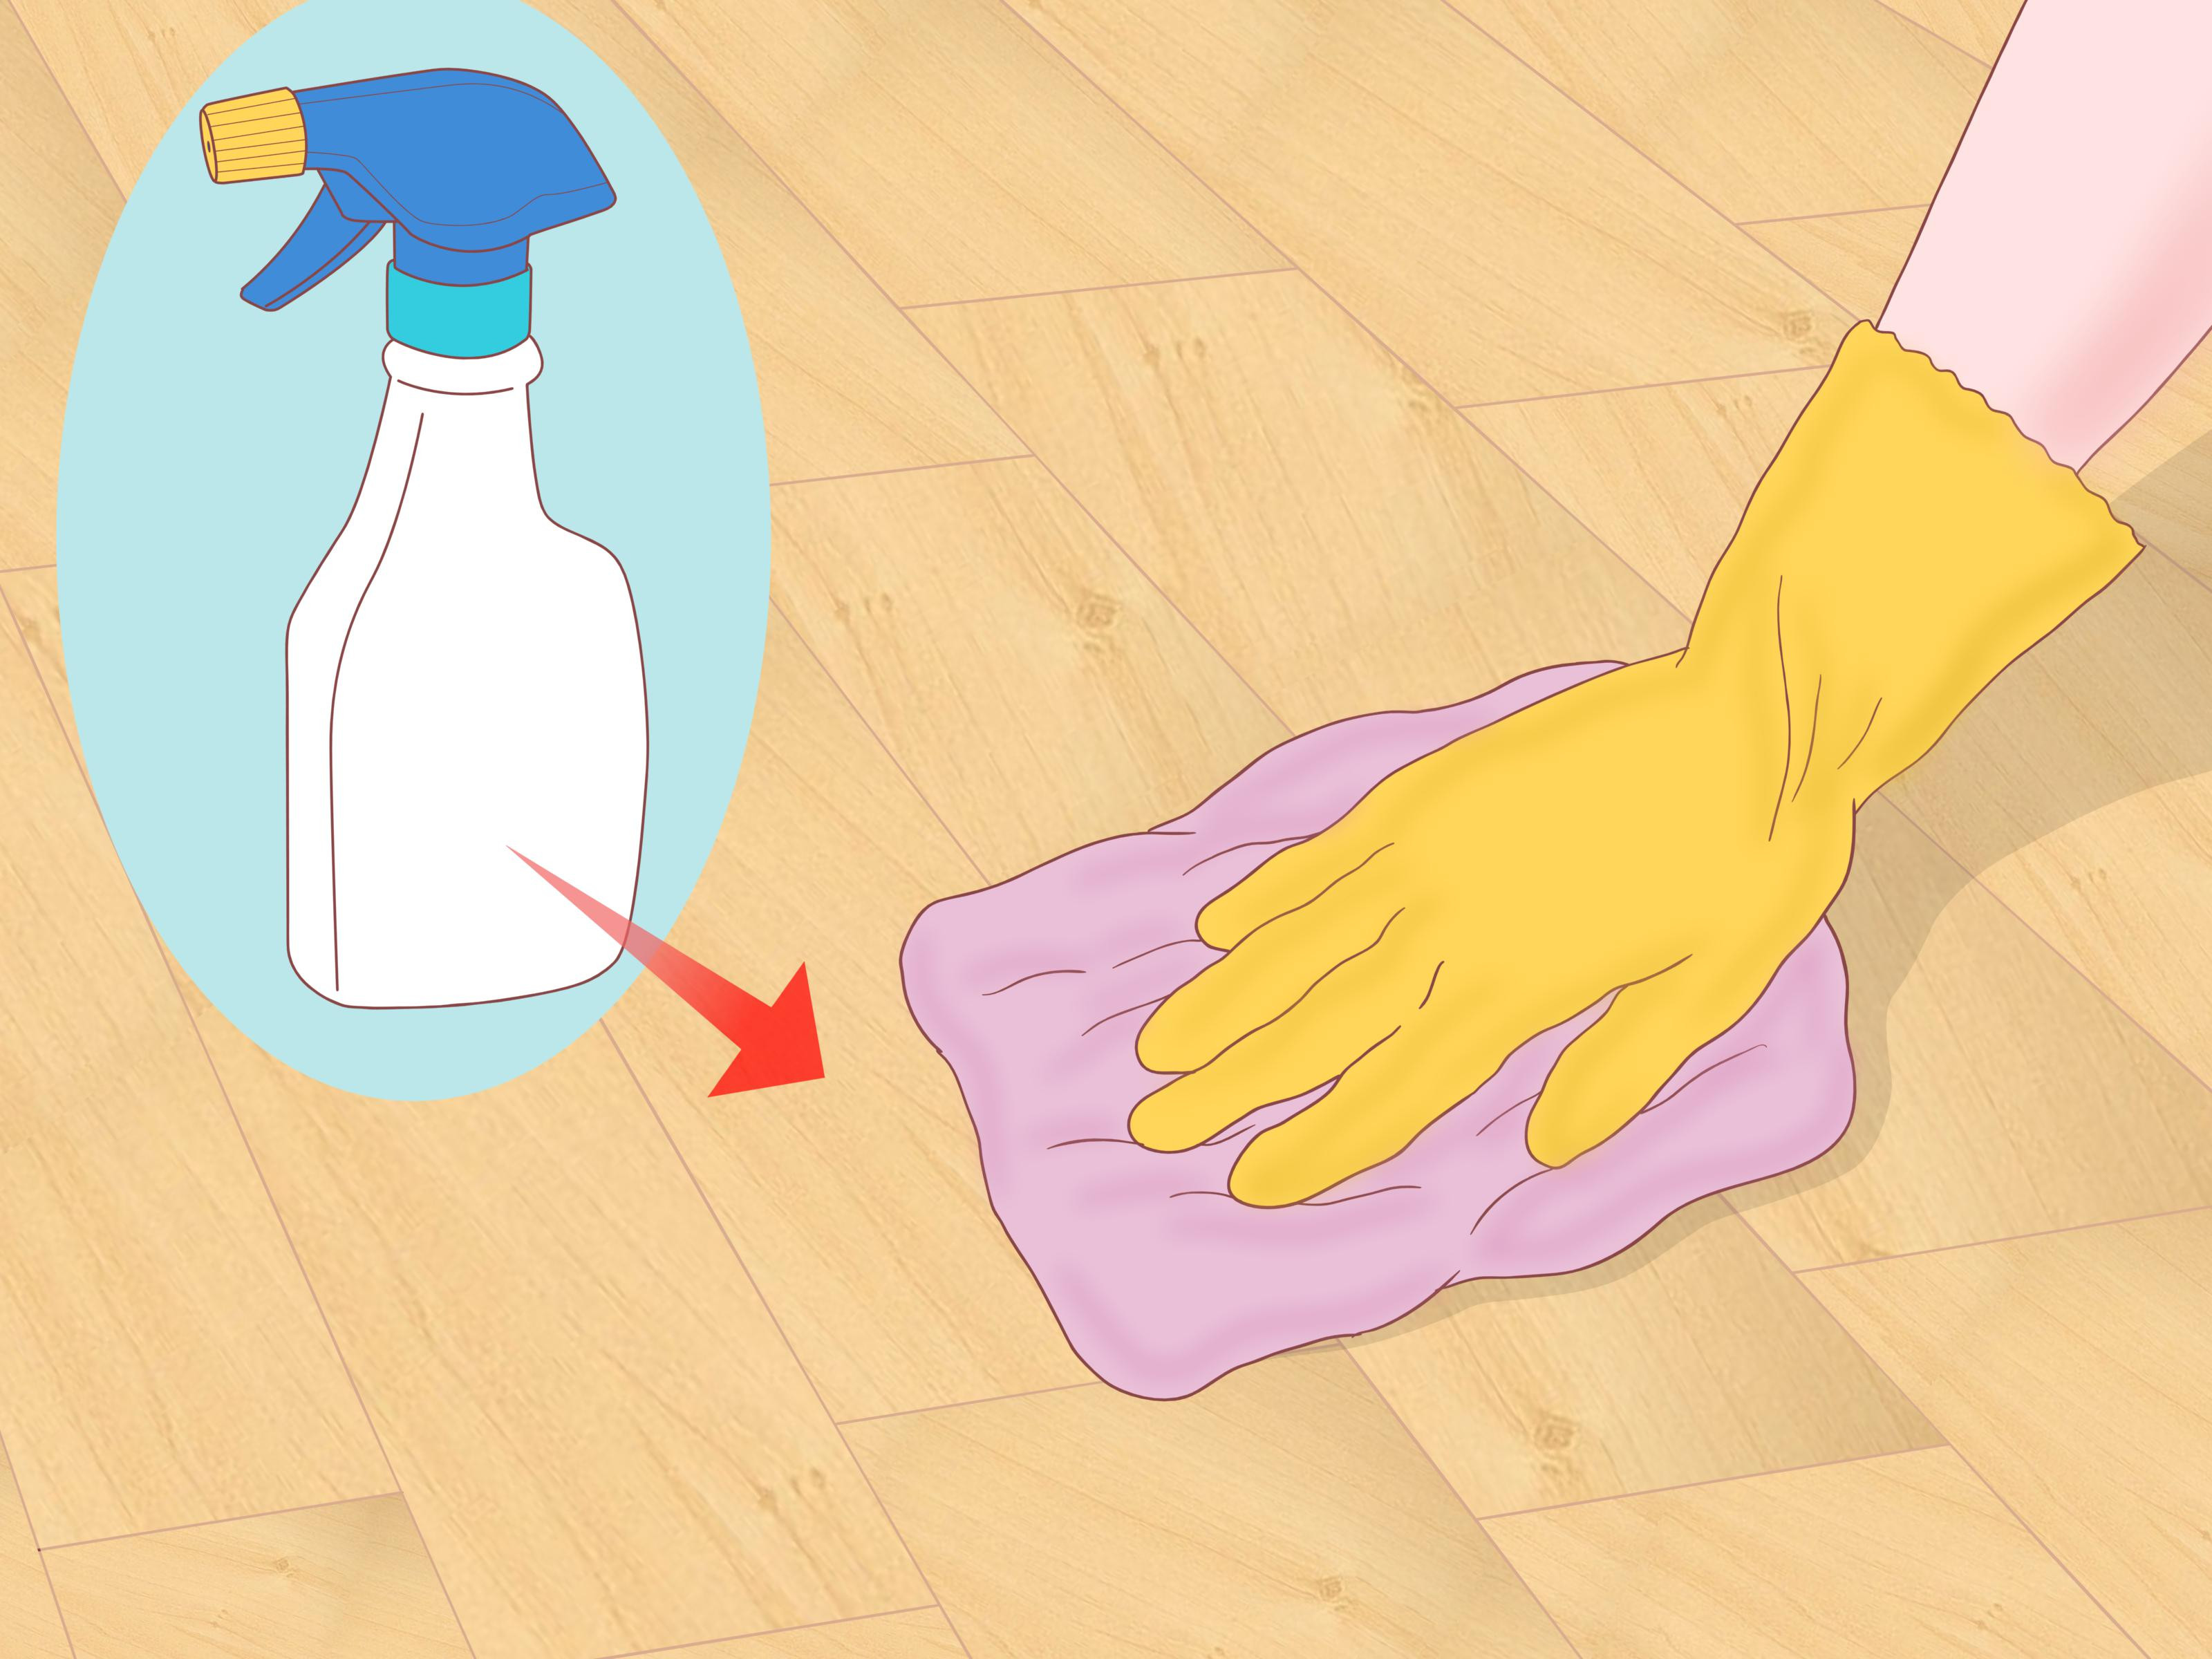 Do It Yourself Hardwood Floor Cleaner Of 3 Ways to Clean Parquet Floors Wikihow with Clean Parquet Floors Step 12